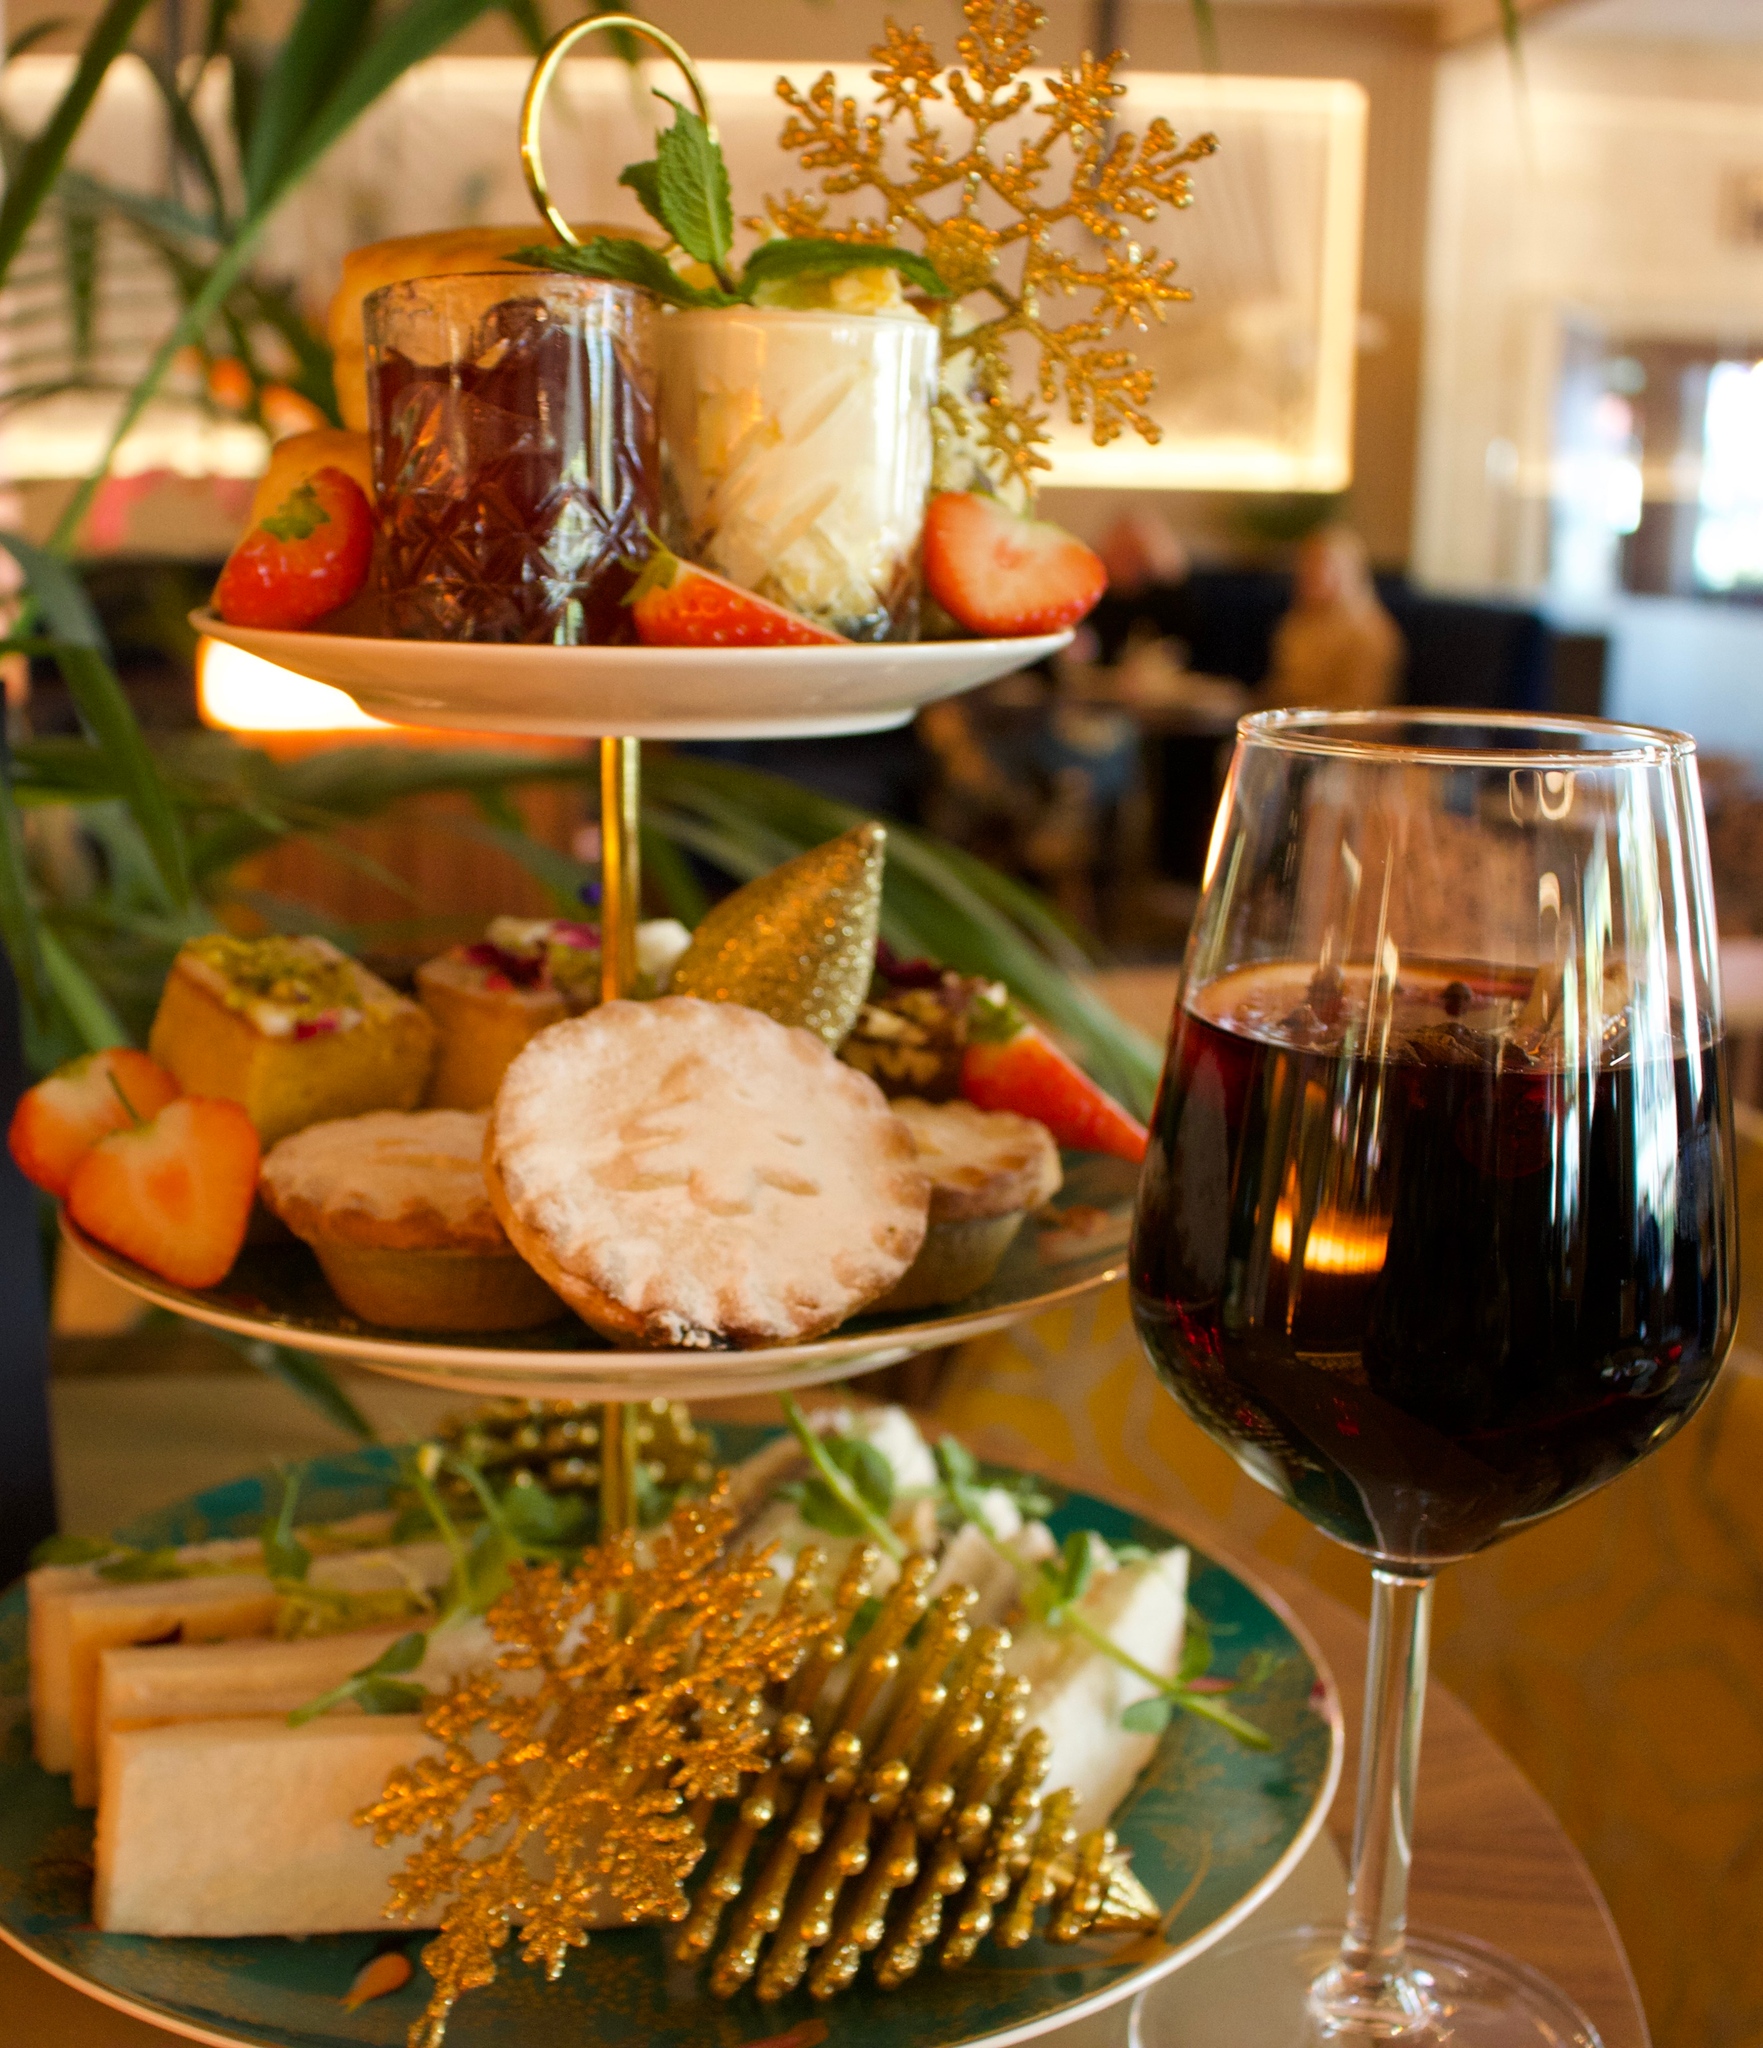 Festive Afternoon Tea at The Grand in Southport